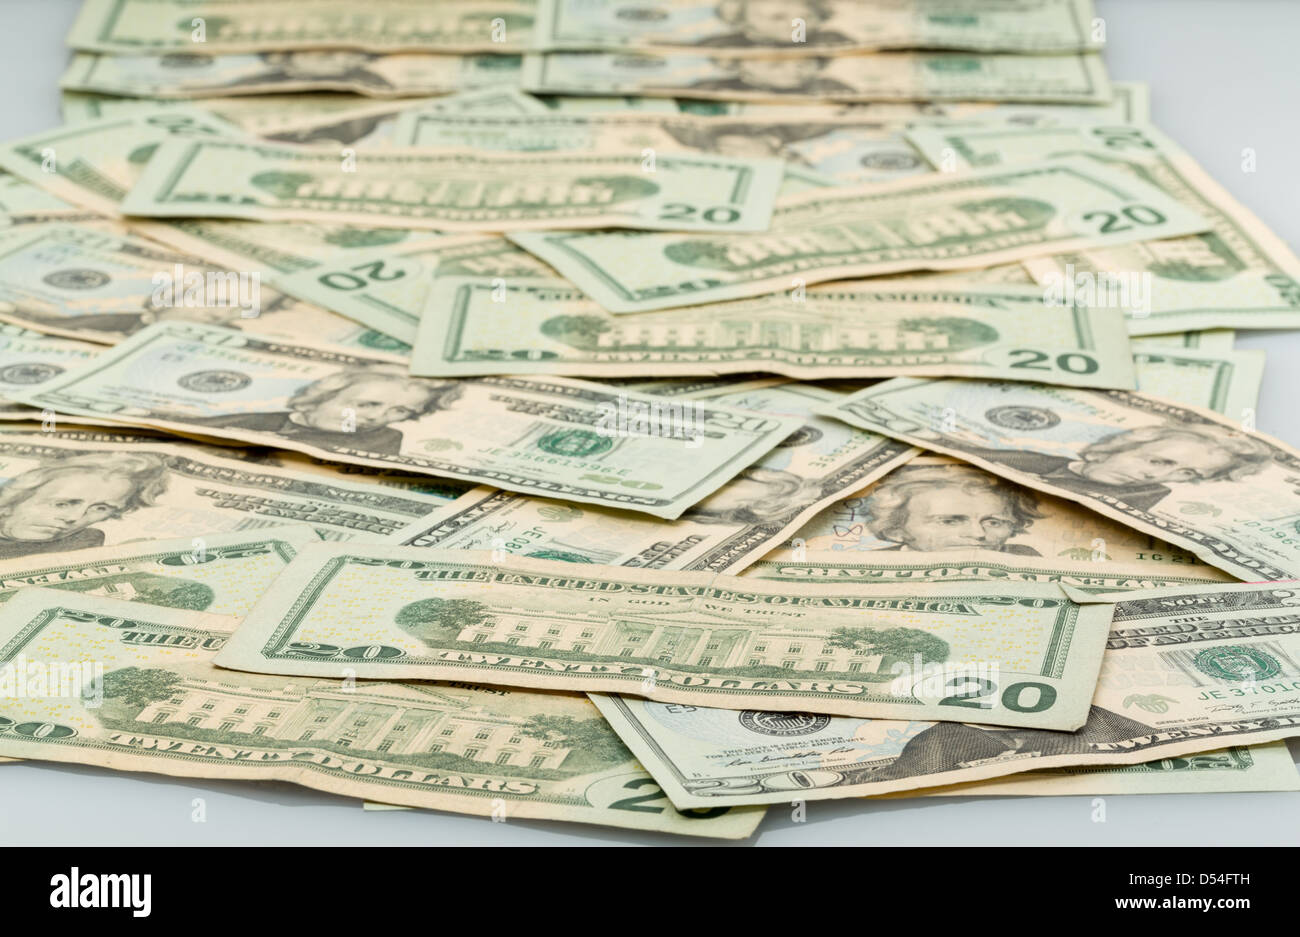 Background image of many twenty dollar bills or notes laid out on table and suitable for composites Stock Photo